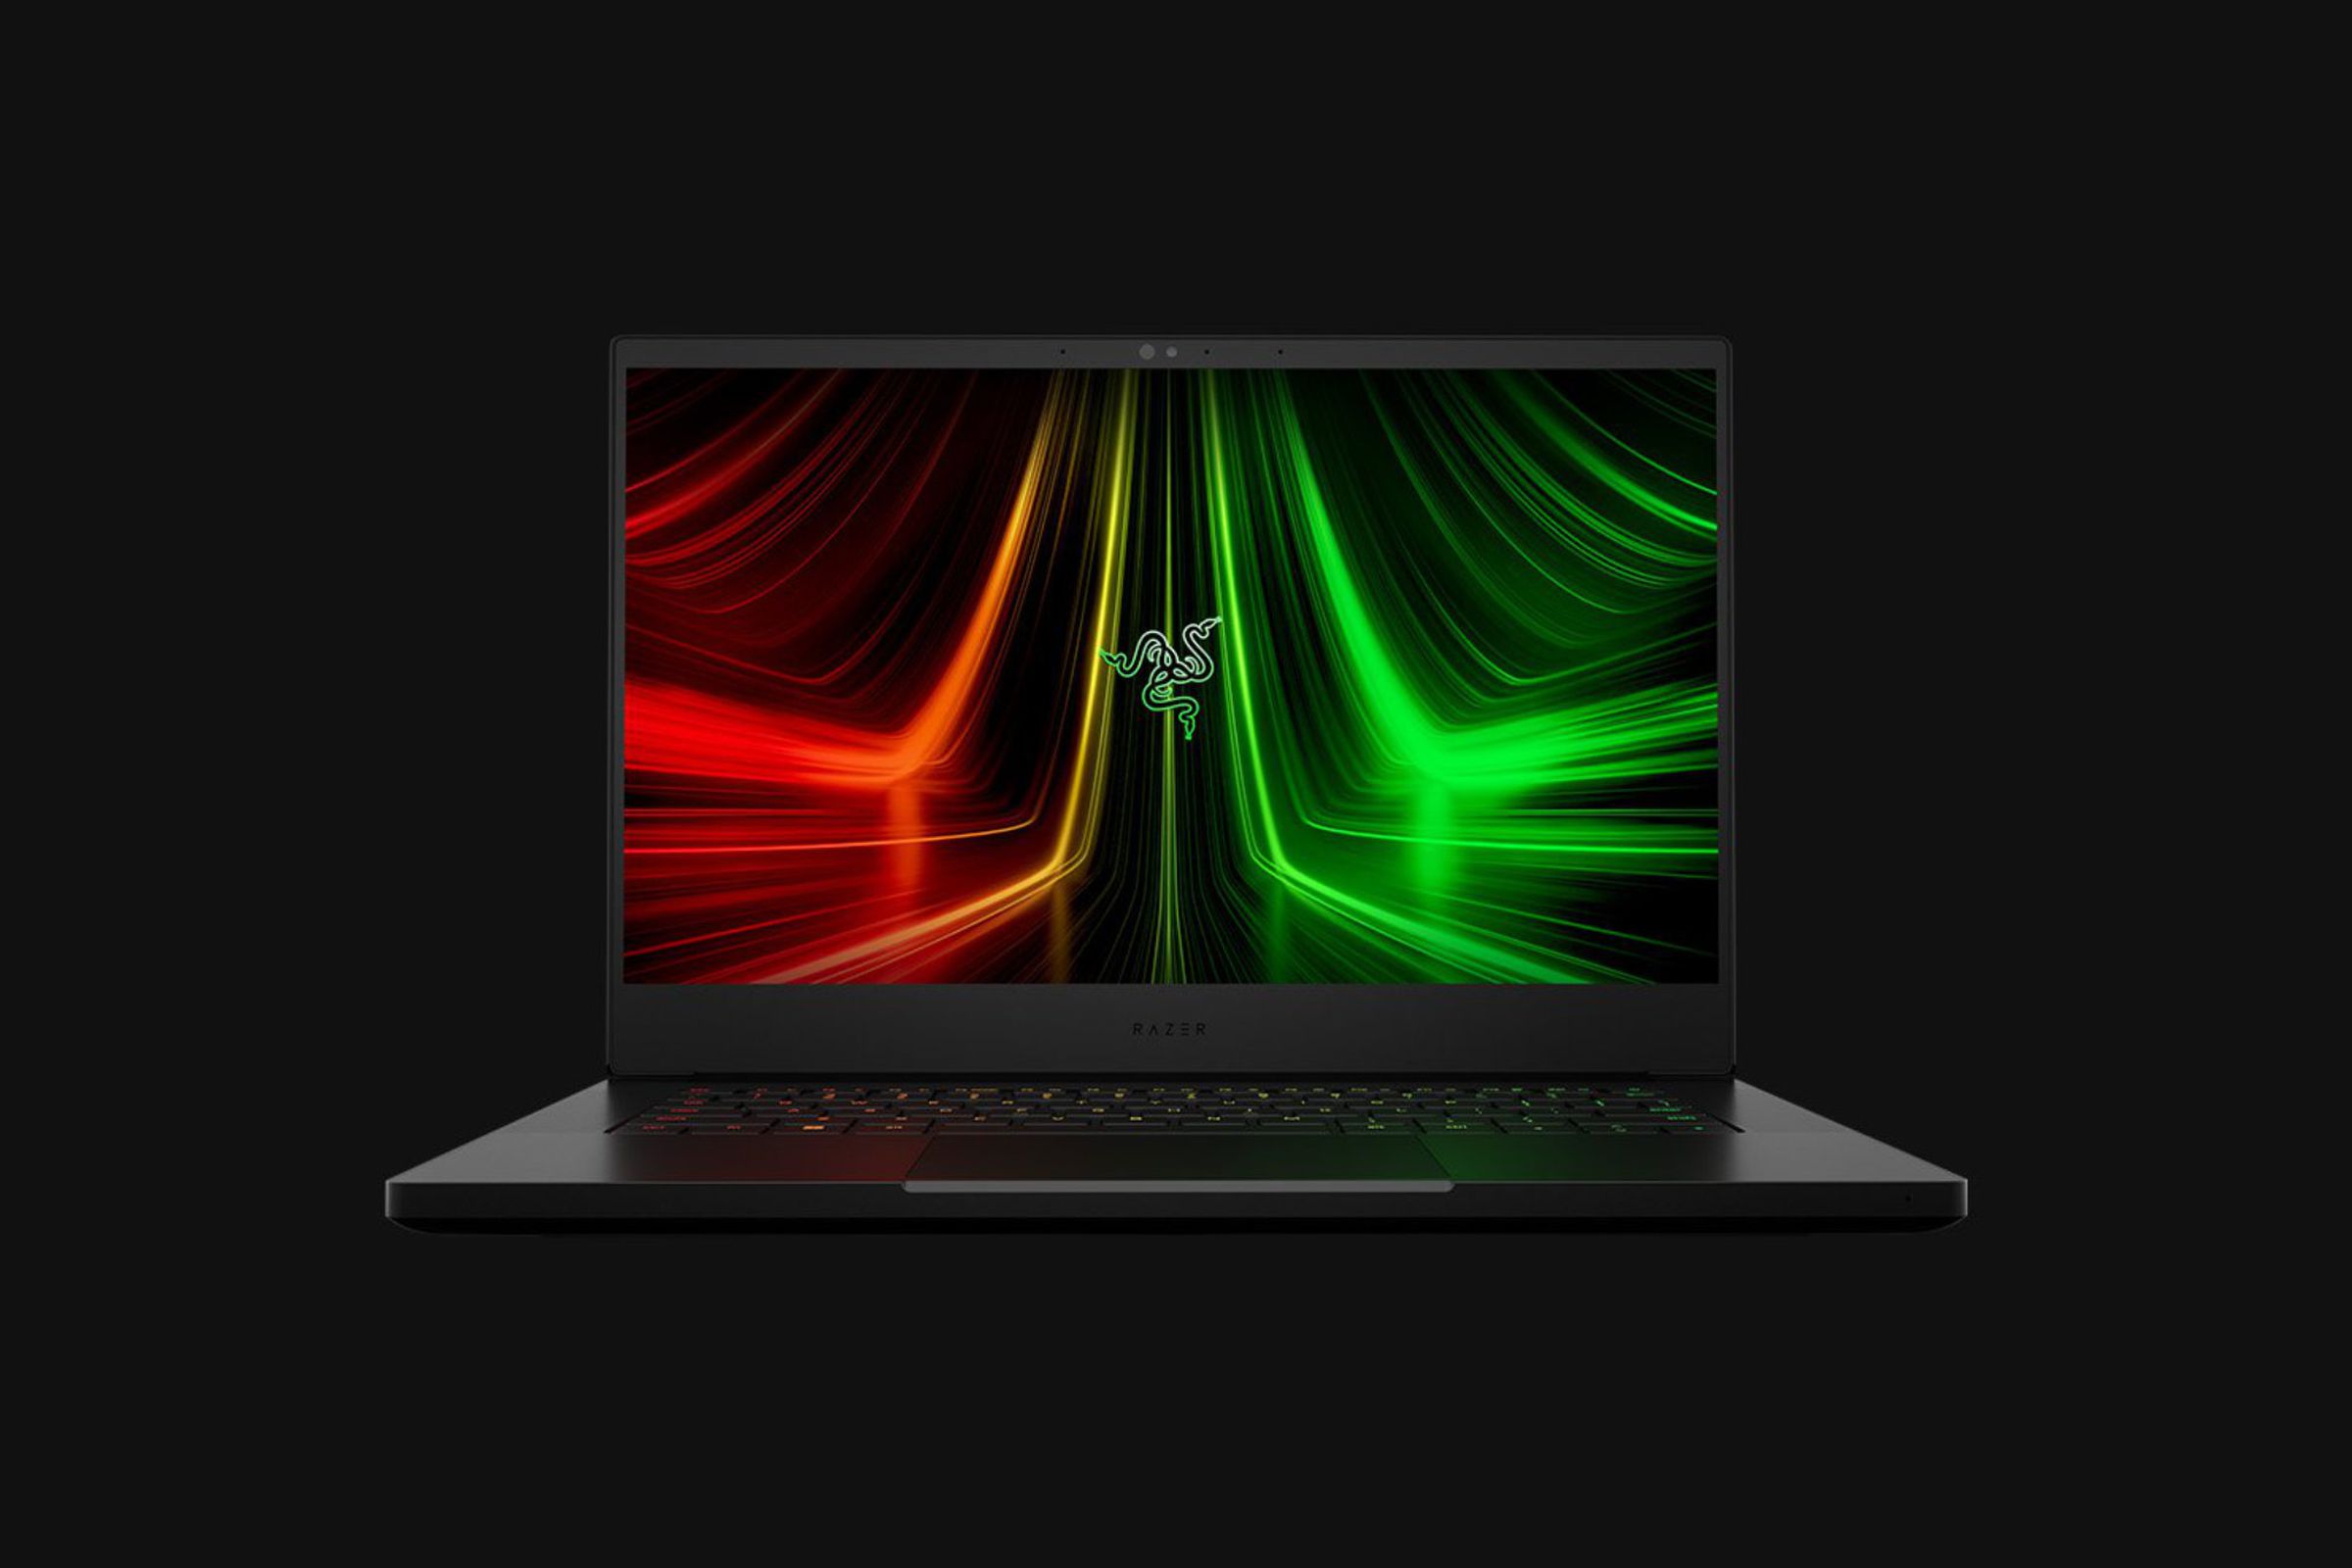 The Razer Blade 14 gaming laptop sits in a black space, opened to the view to show off its 14-inch screen.